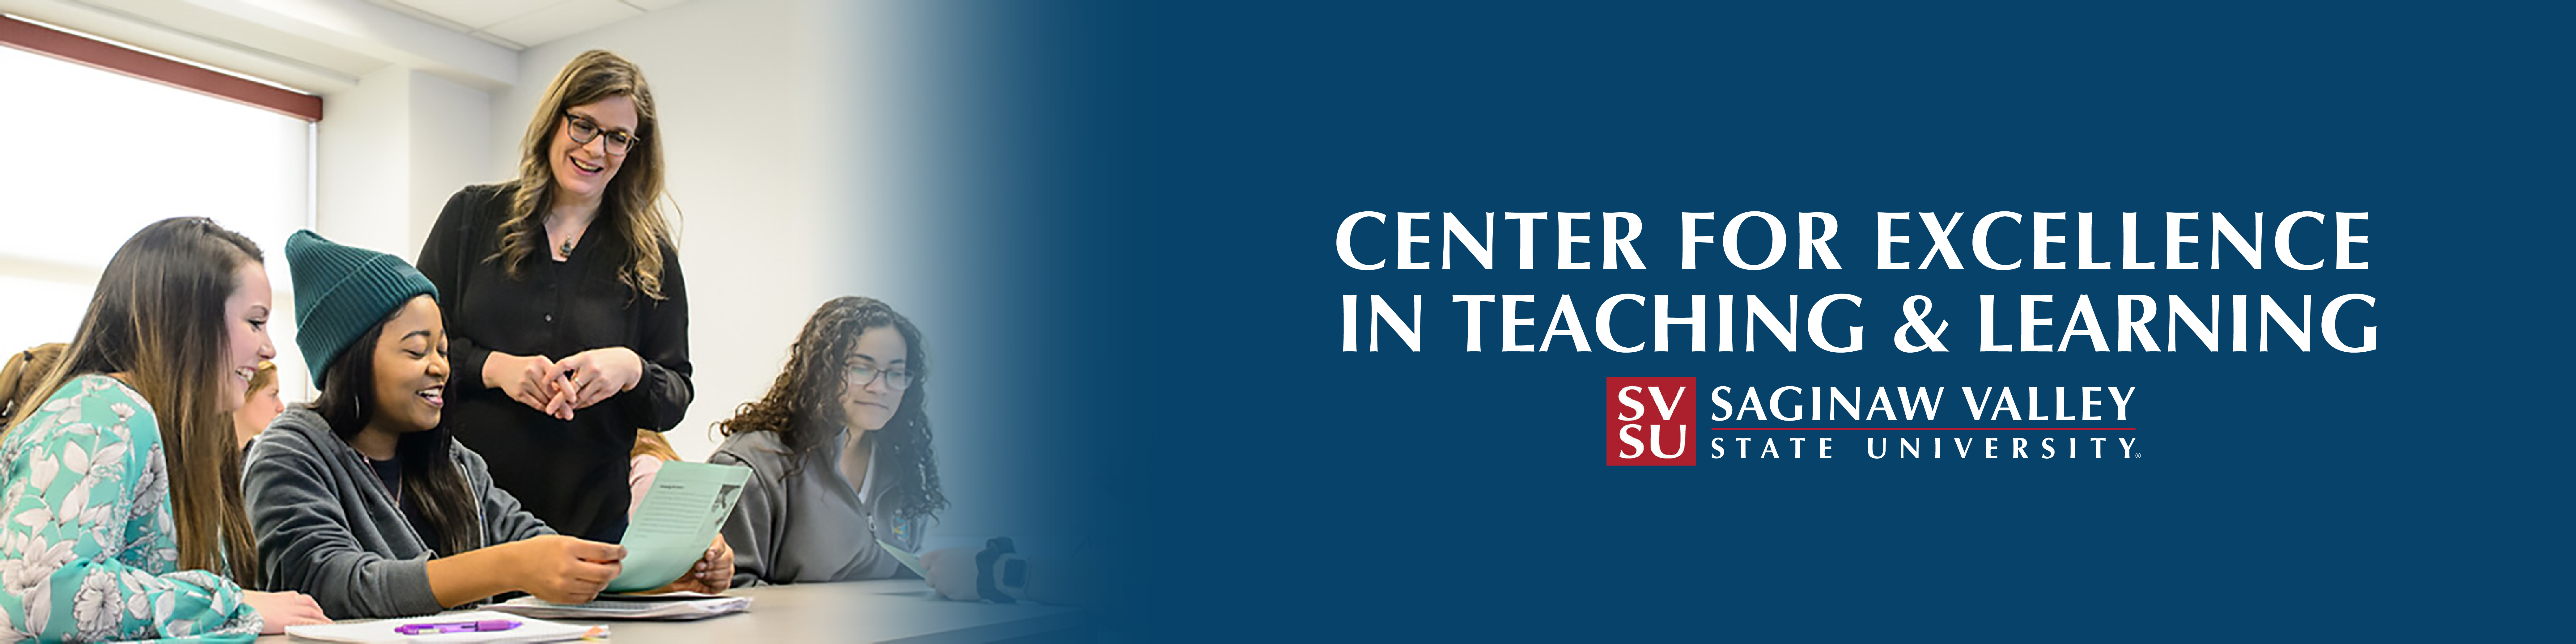 Center for Excellence in Teaching and Learning